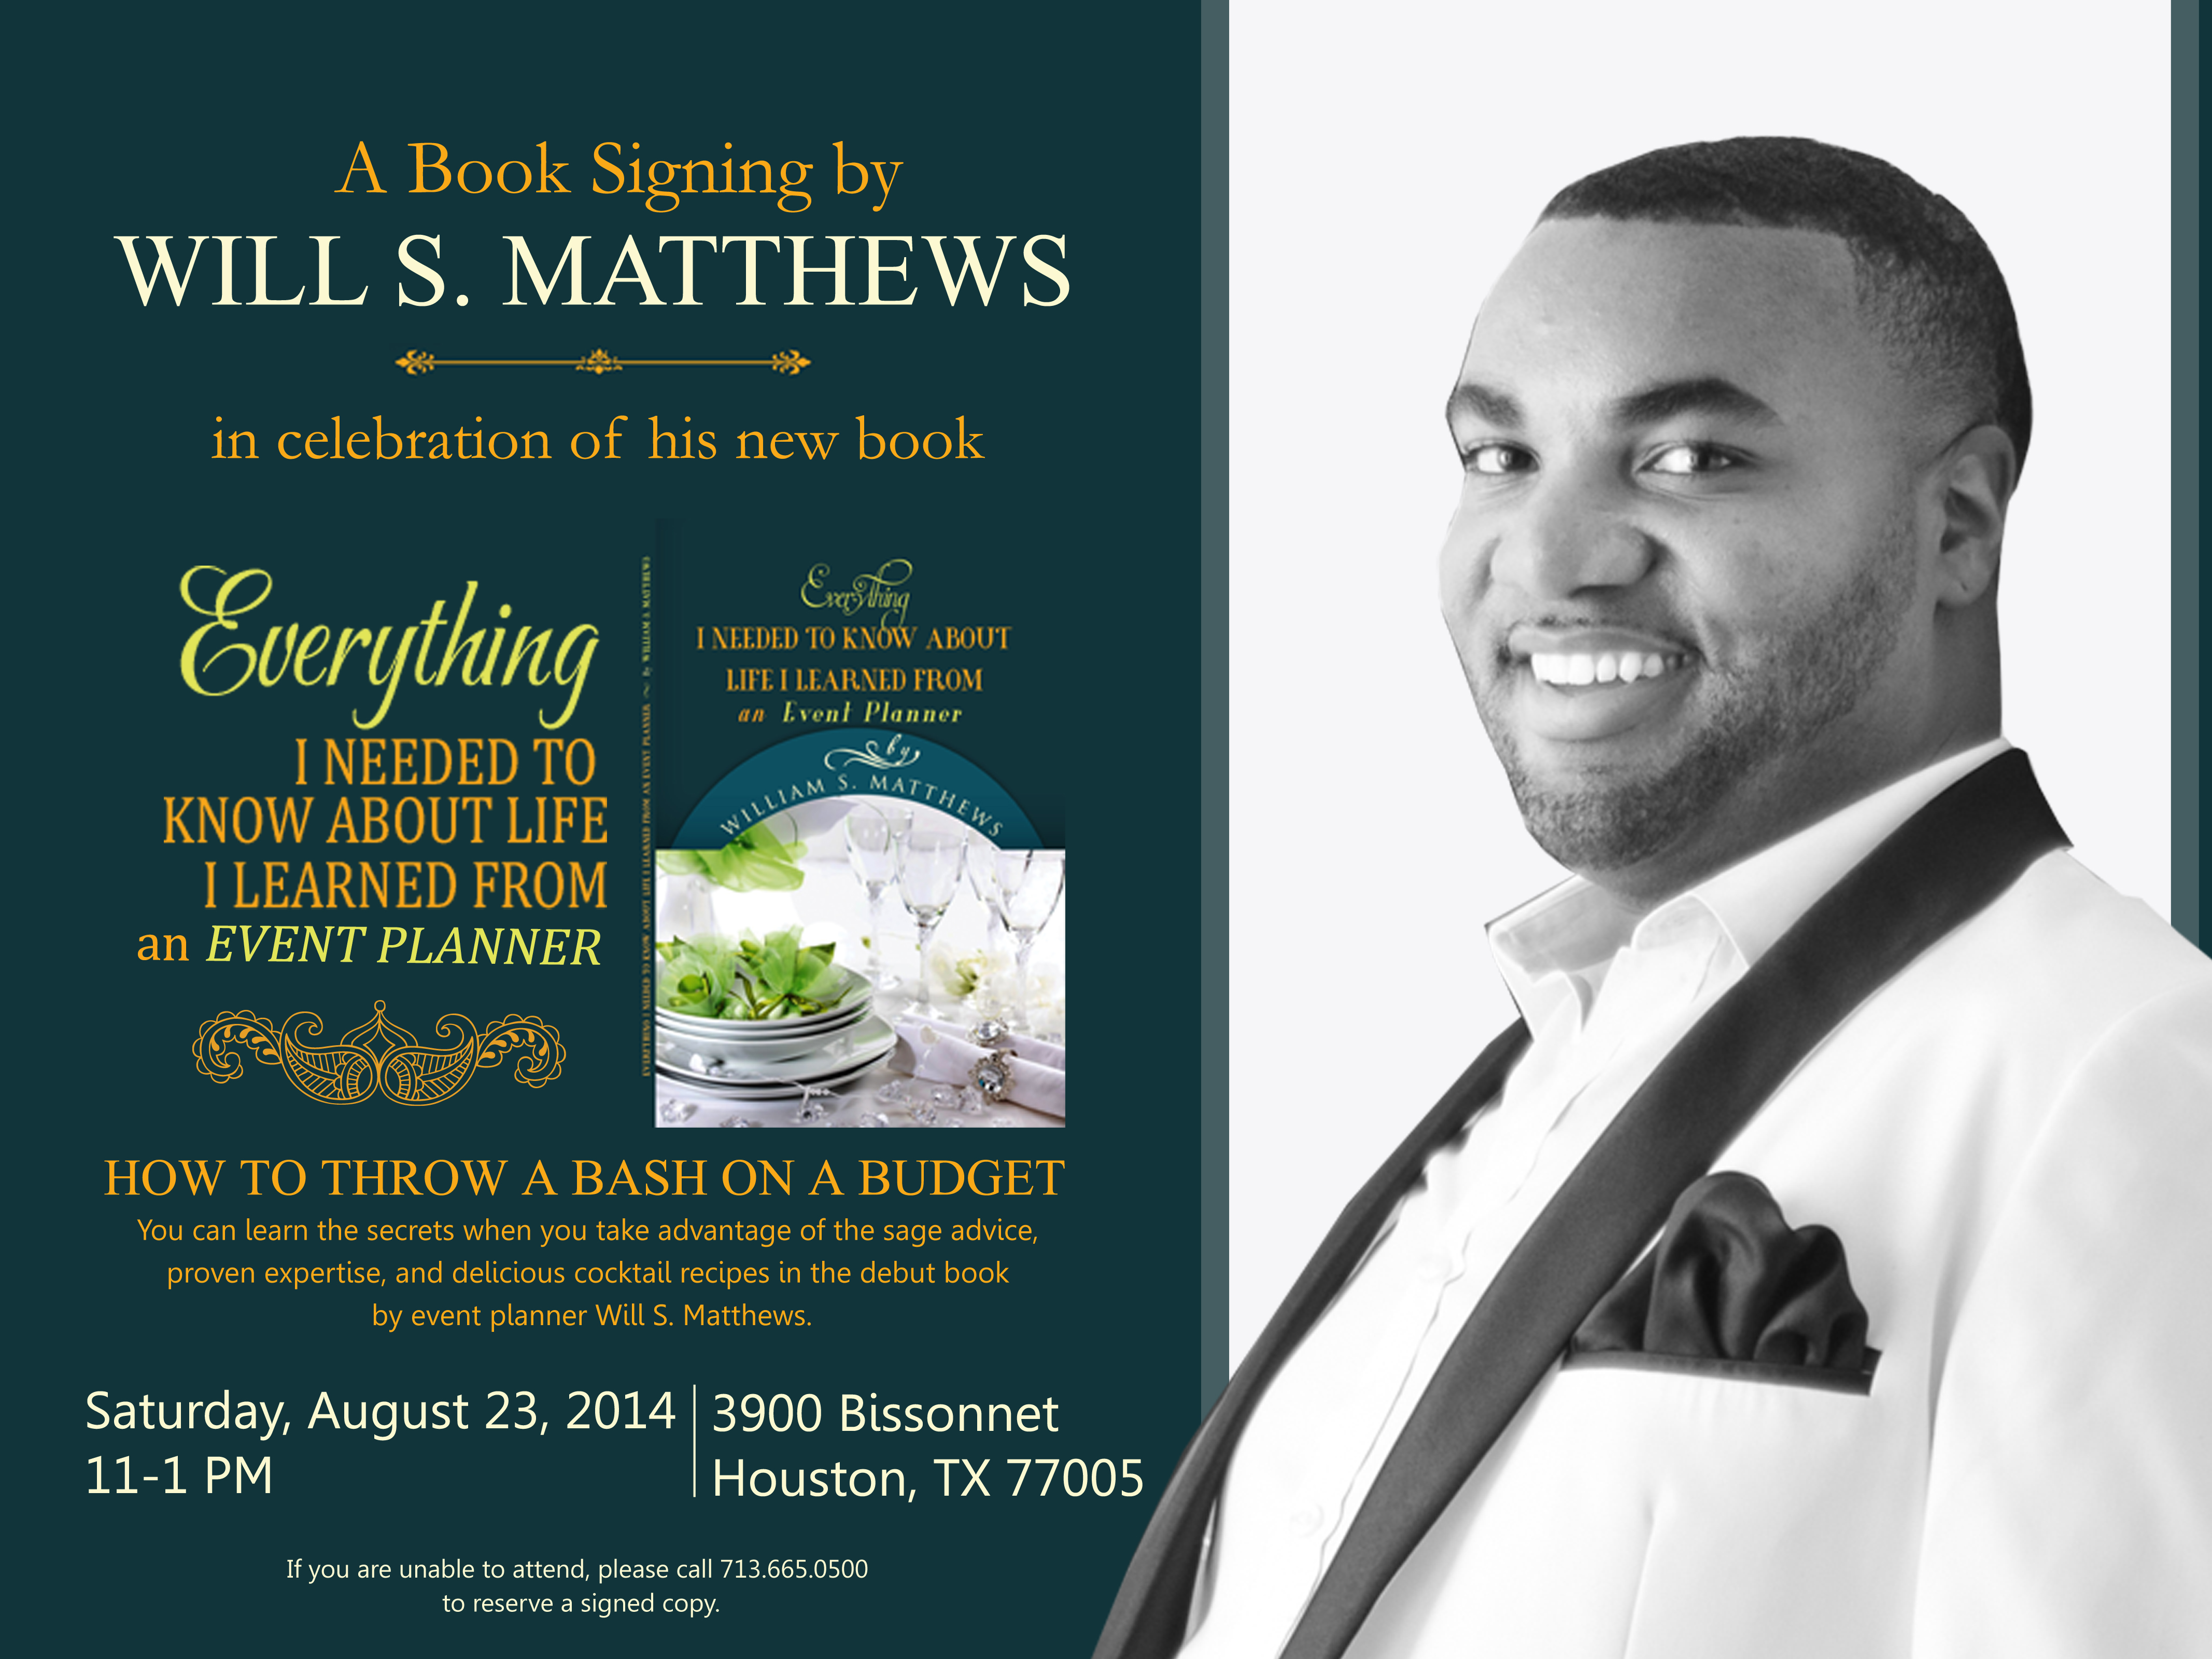 Book Signing Event with Will S. Matthews